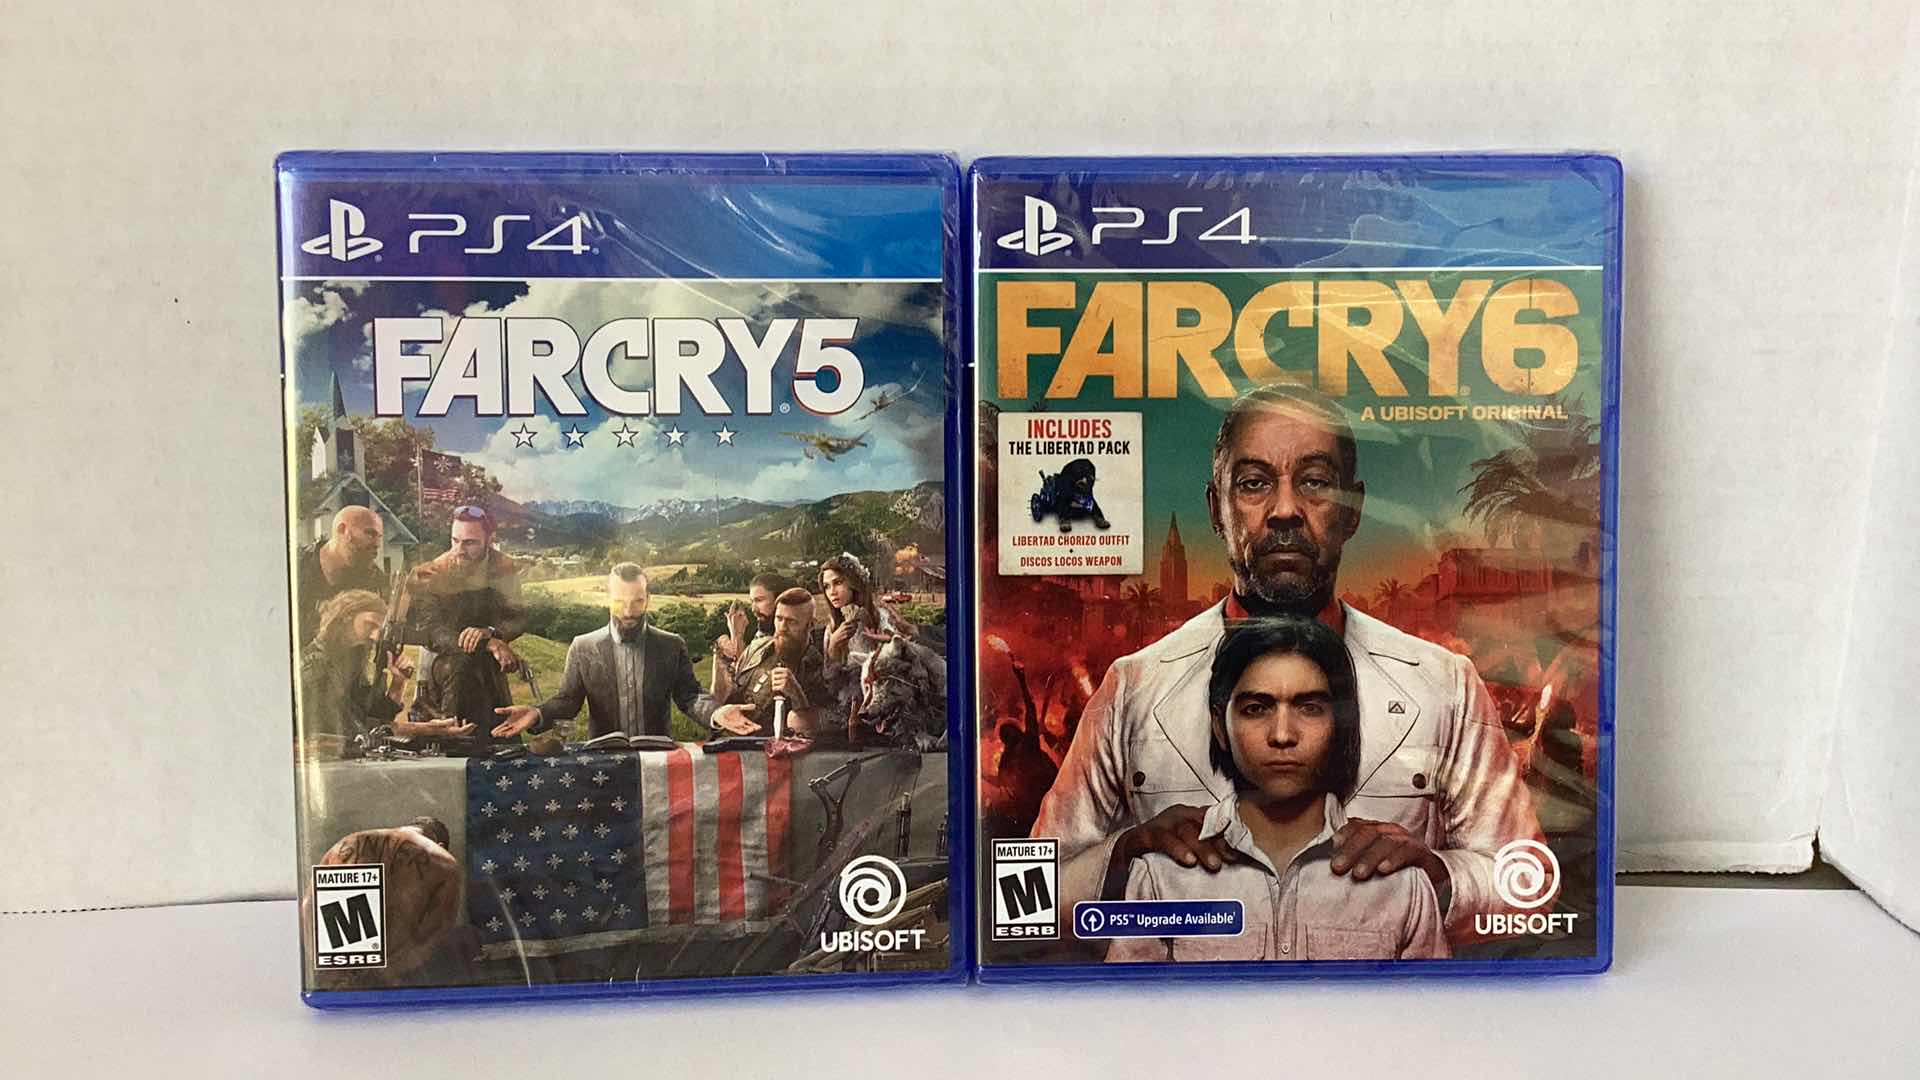 Photo 1 of 2 NEW PS4 GAMES: FAR CRY 5 AND FAR CRY 6